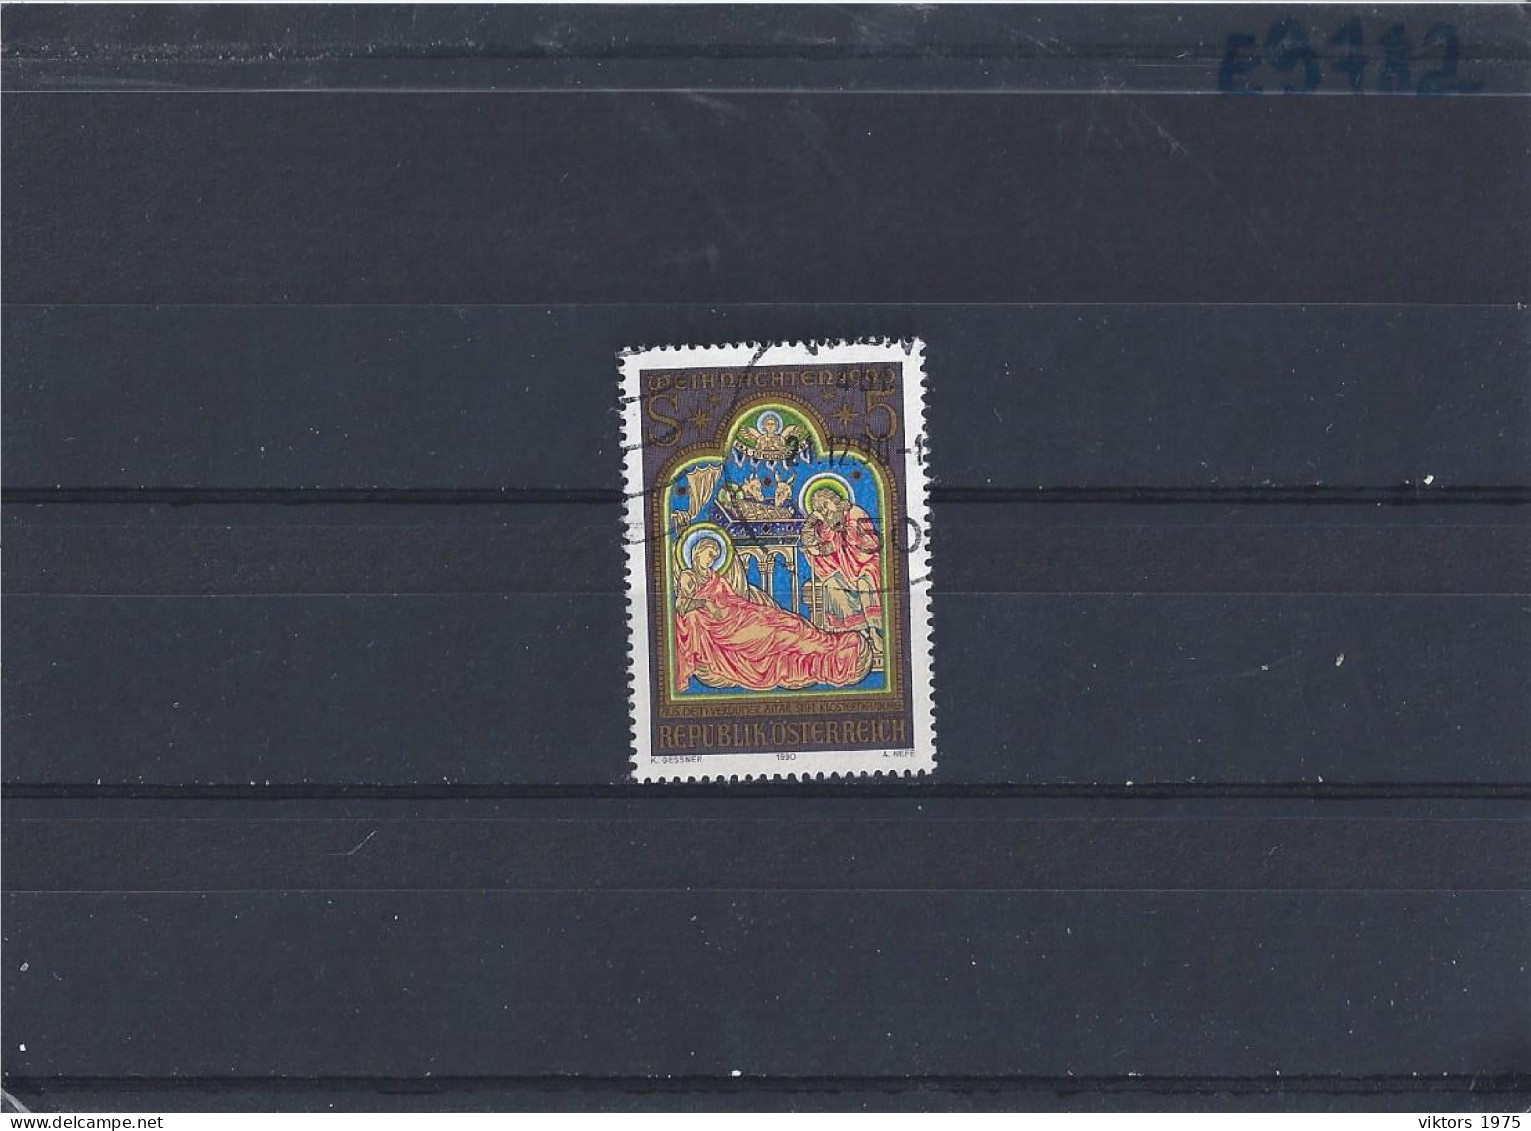 Used Stamp Nr.2012 In MICHEL Catalog - Used Stamps